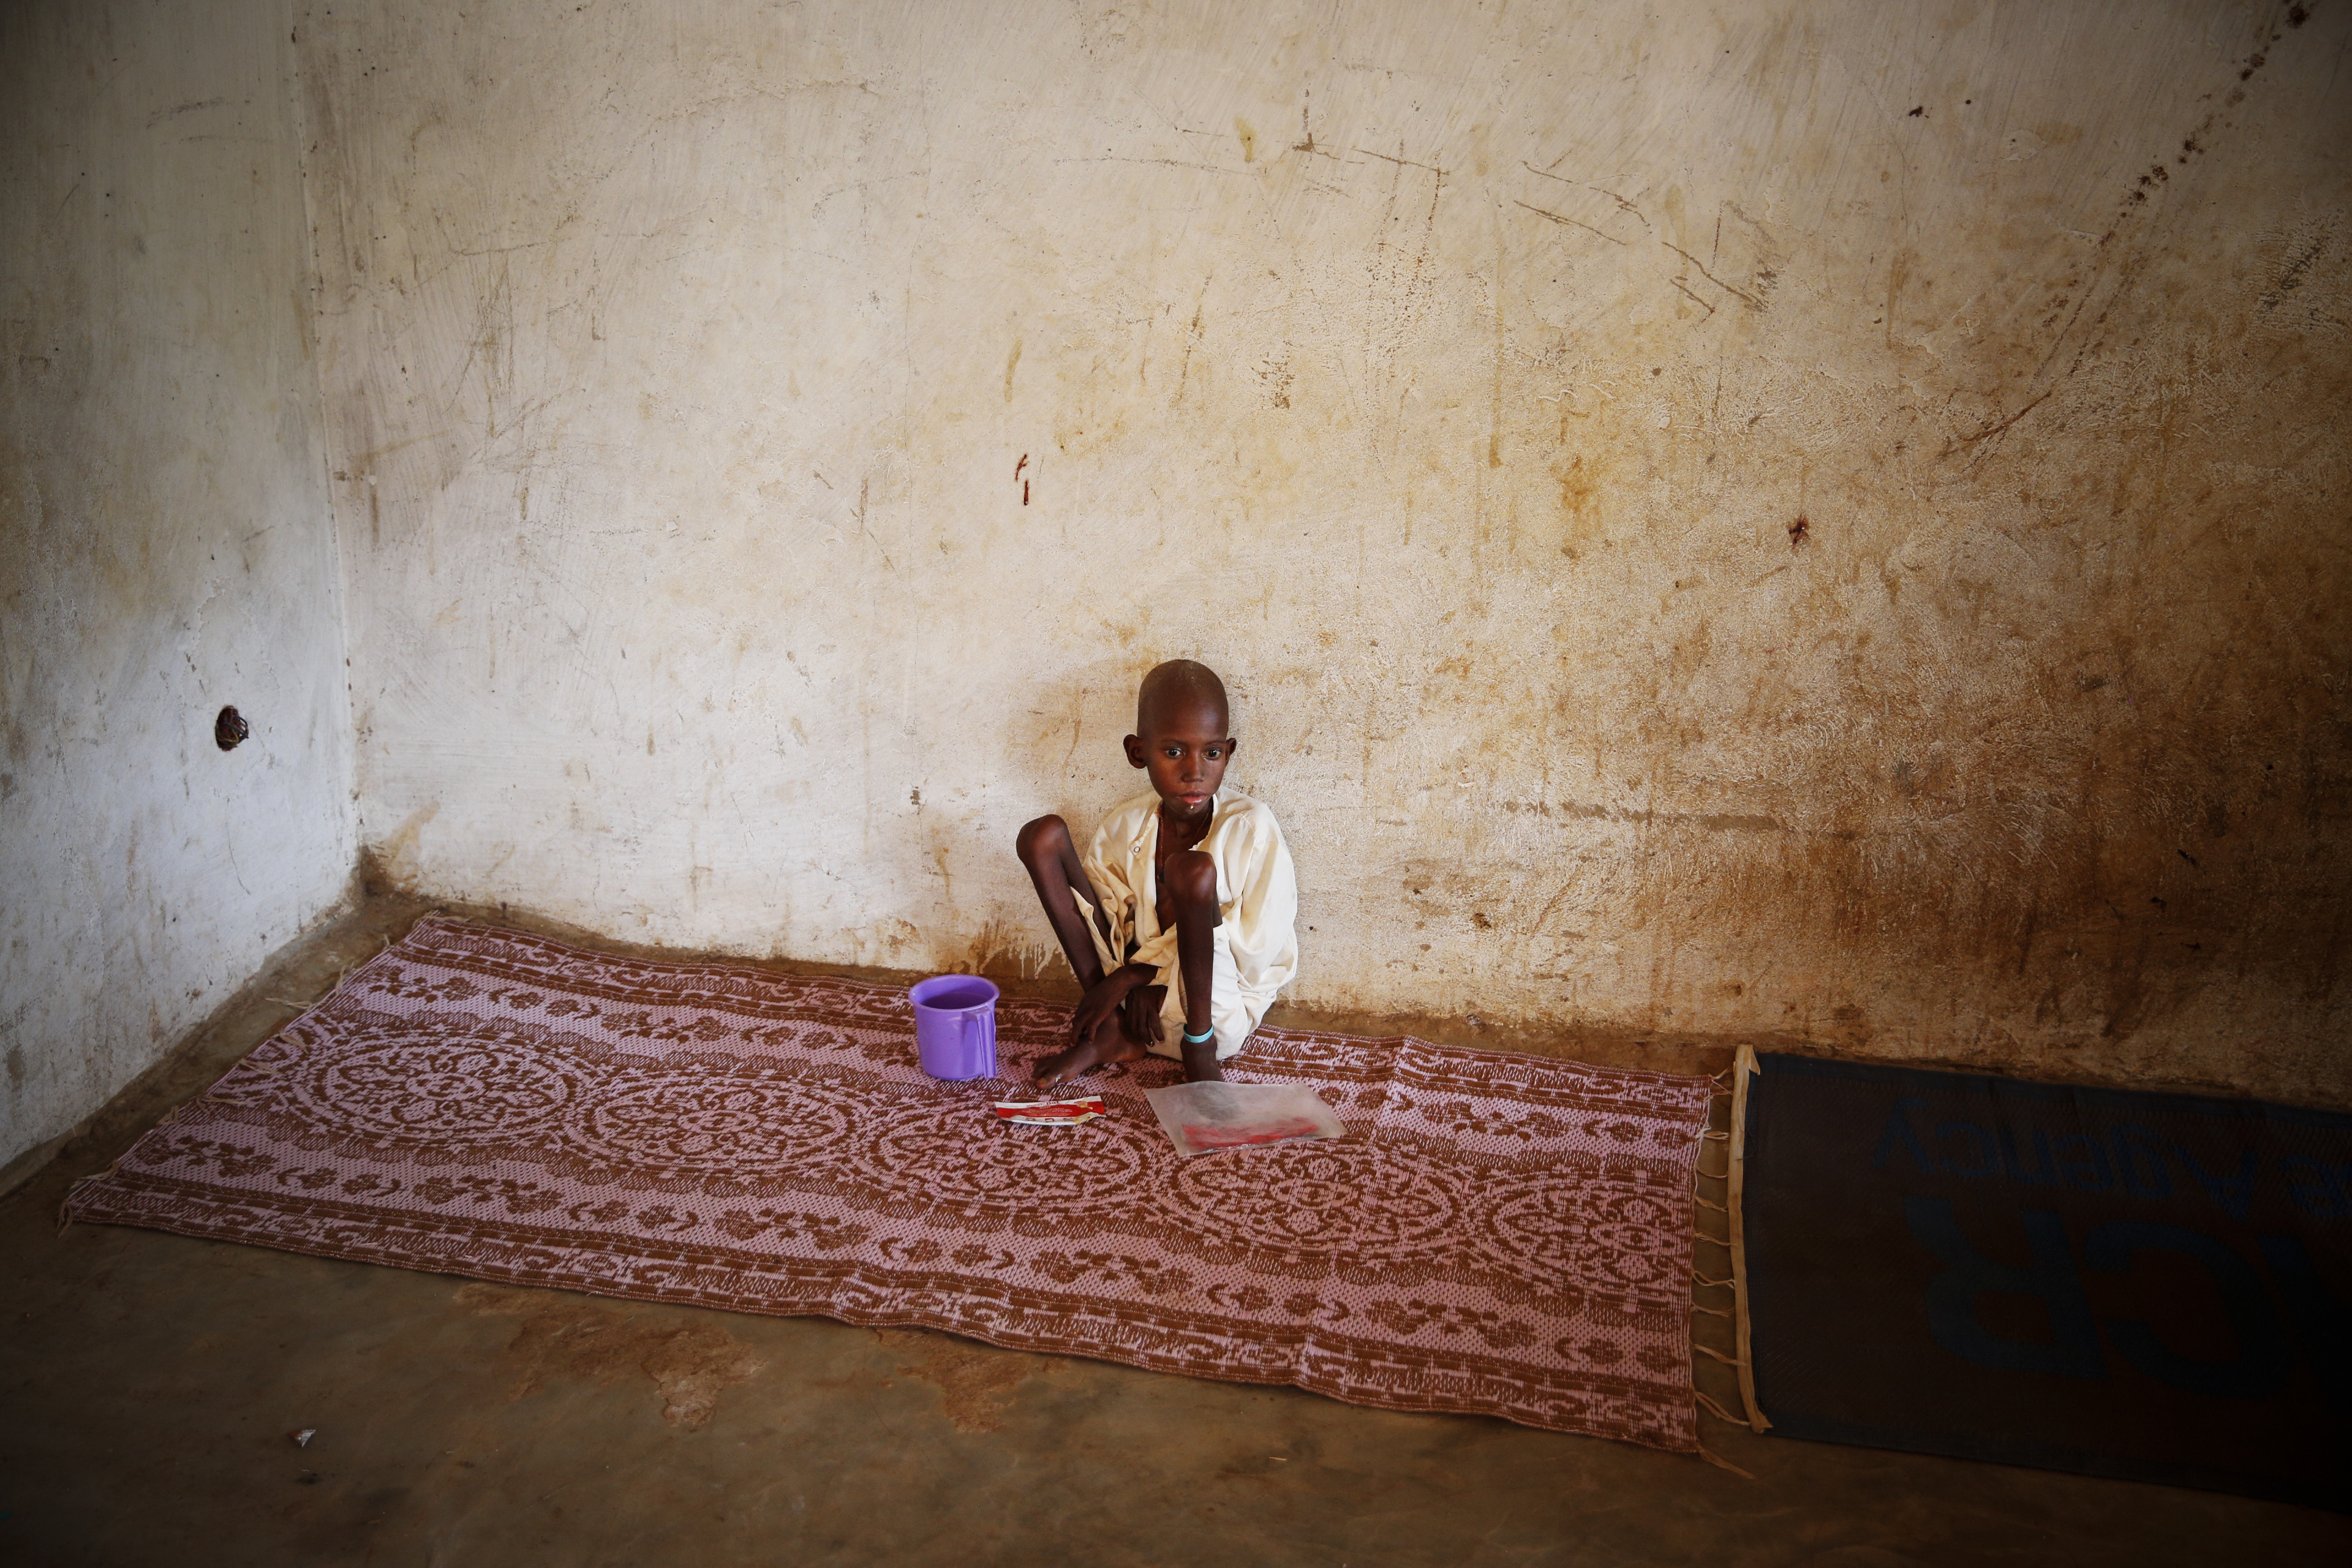 Mar. 27, 2014. A young Peuhl boy named Zakaria, who suffers from malnutrition and was brought to the pediatric center, is among the Muslims who have taken refuge at the mosque in the Muslim enclave of Begoua.